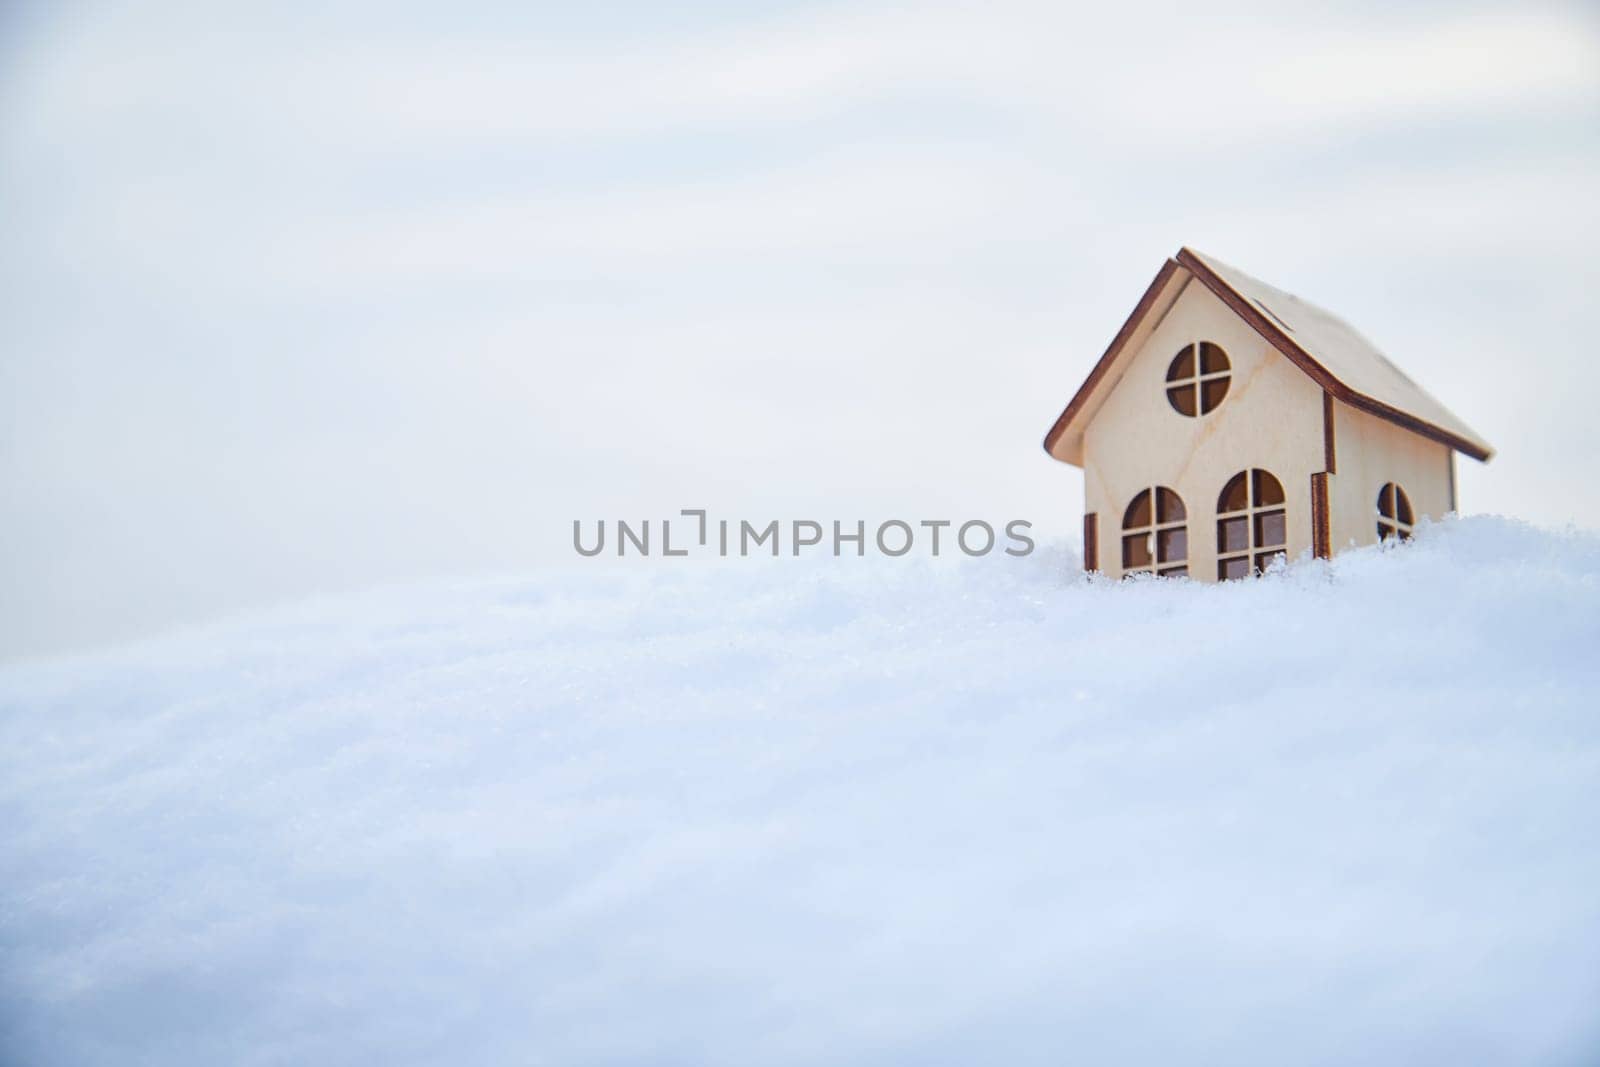 Wooden toy house on snow, natural abstract background. winter season concept. symbol of cozy, loving family home. construction, sales, rental concept. Christmas and new year holidays. copy space